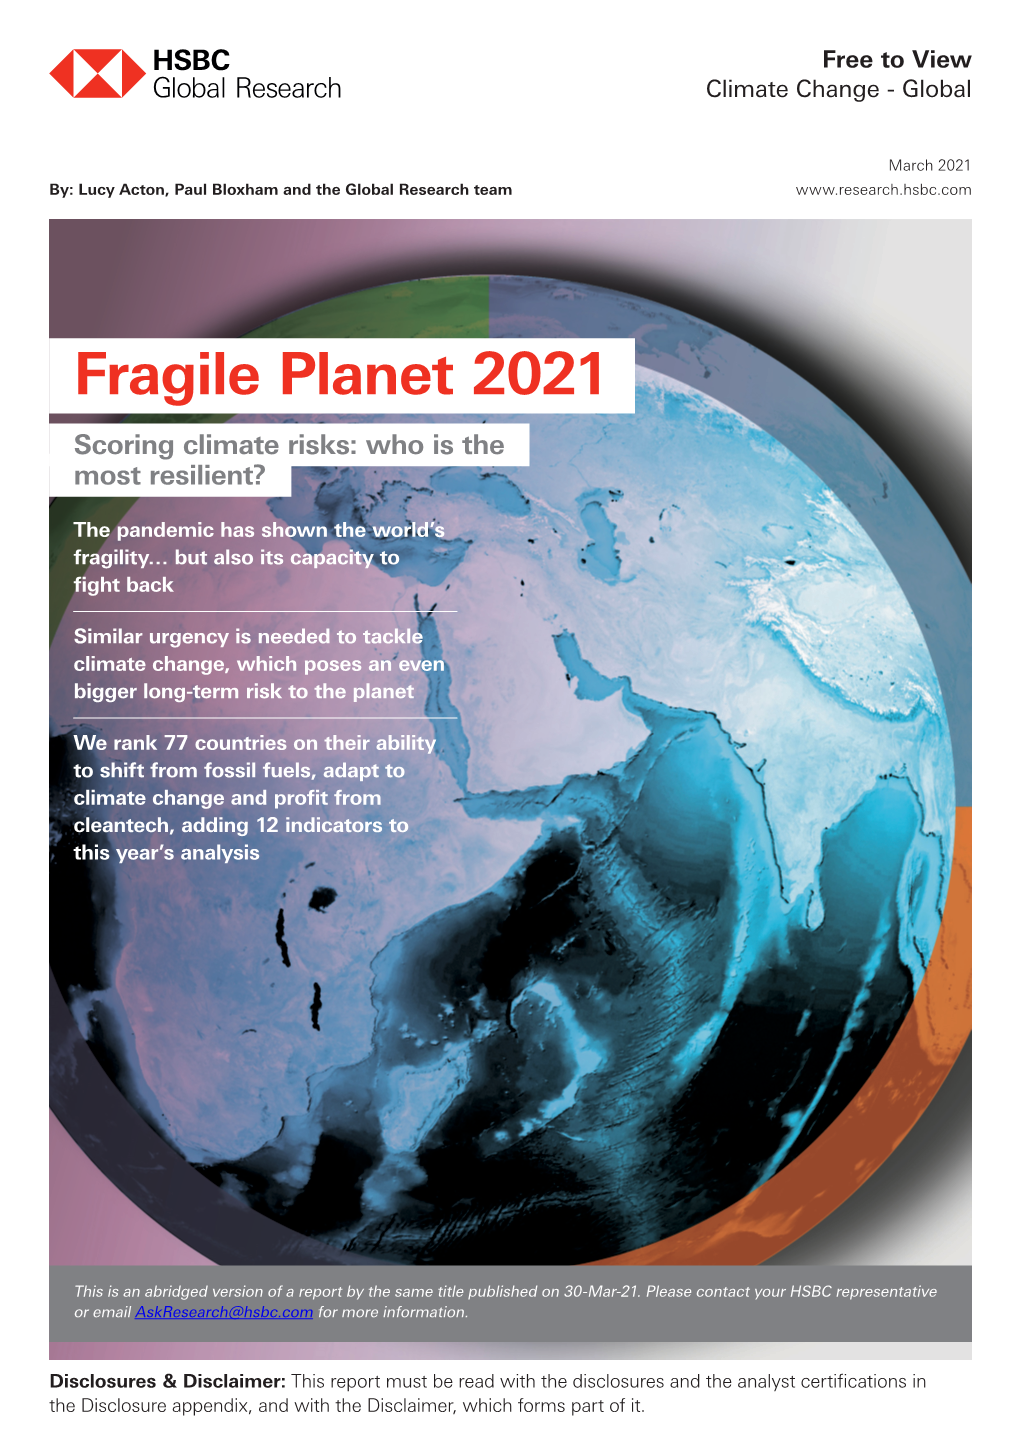 Fragile Planet 2021 Fragile Planet 2021 Scoring Climate Risks: Who Is the Most Resilient?